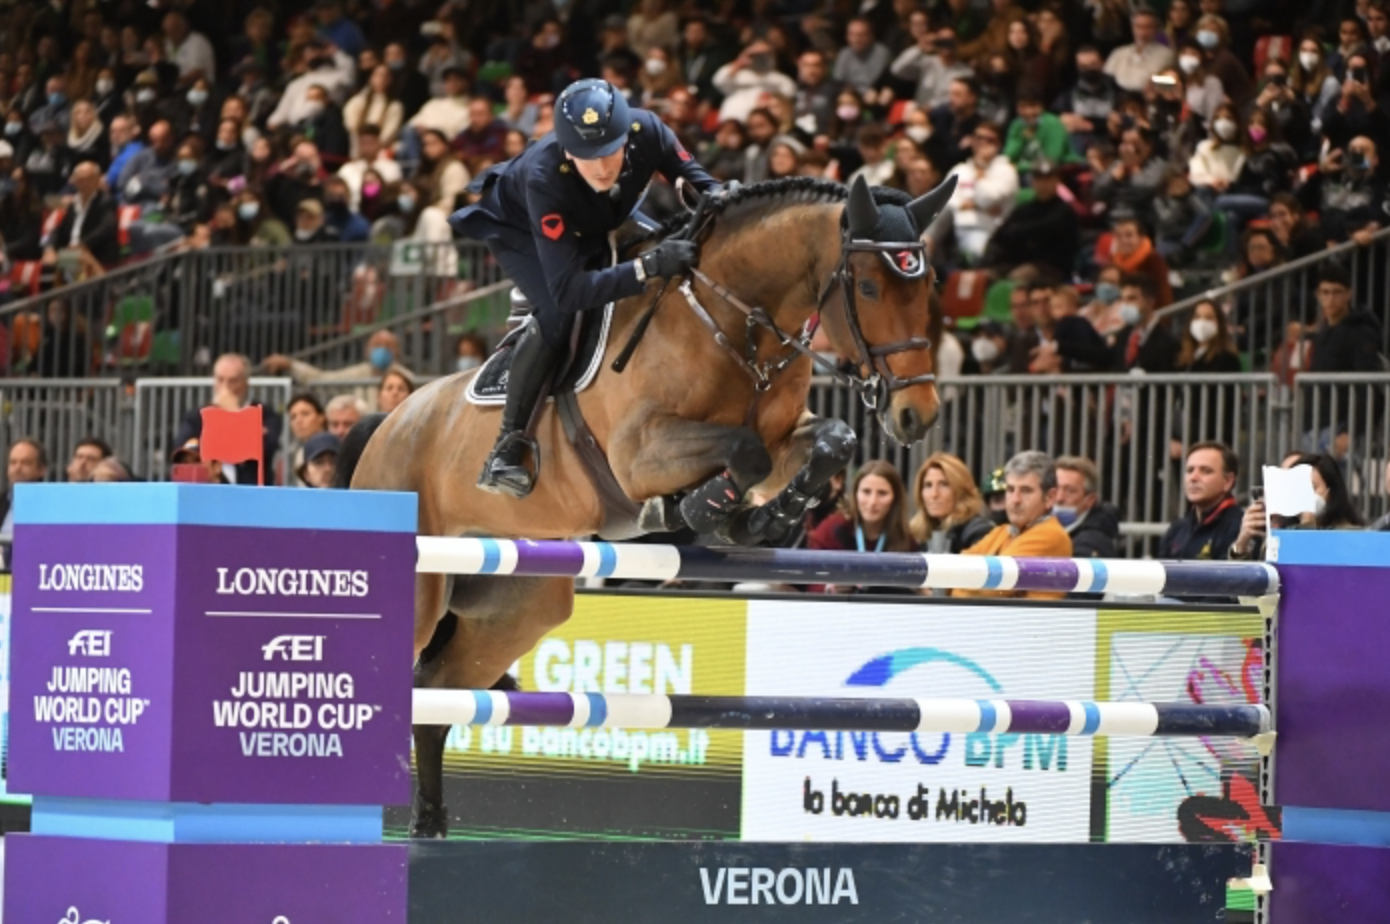 Lorenzo de Luca opens Verona with a victory for Presence Bleue VDM: "The World Cup Grand Prix seems cursed"